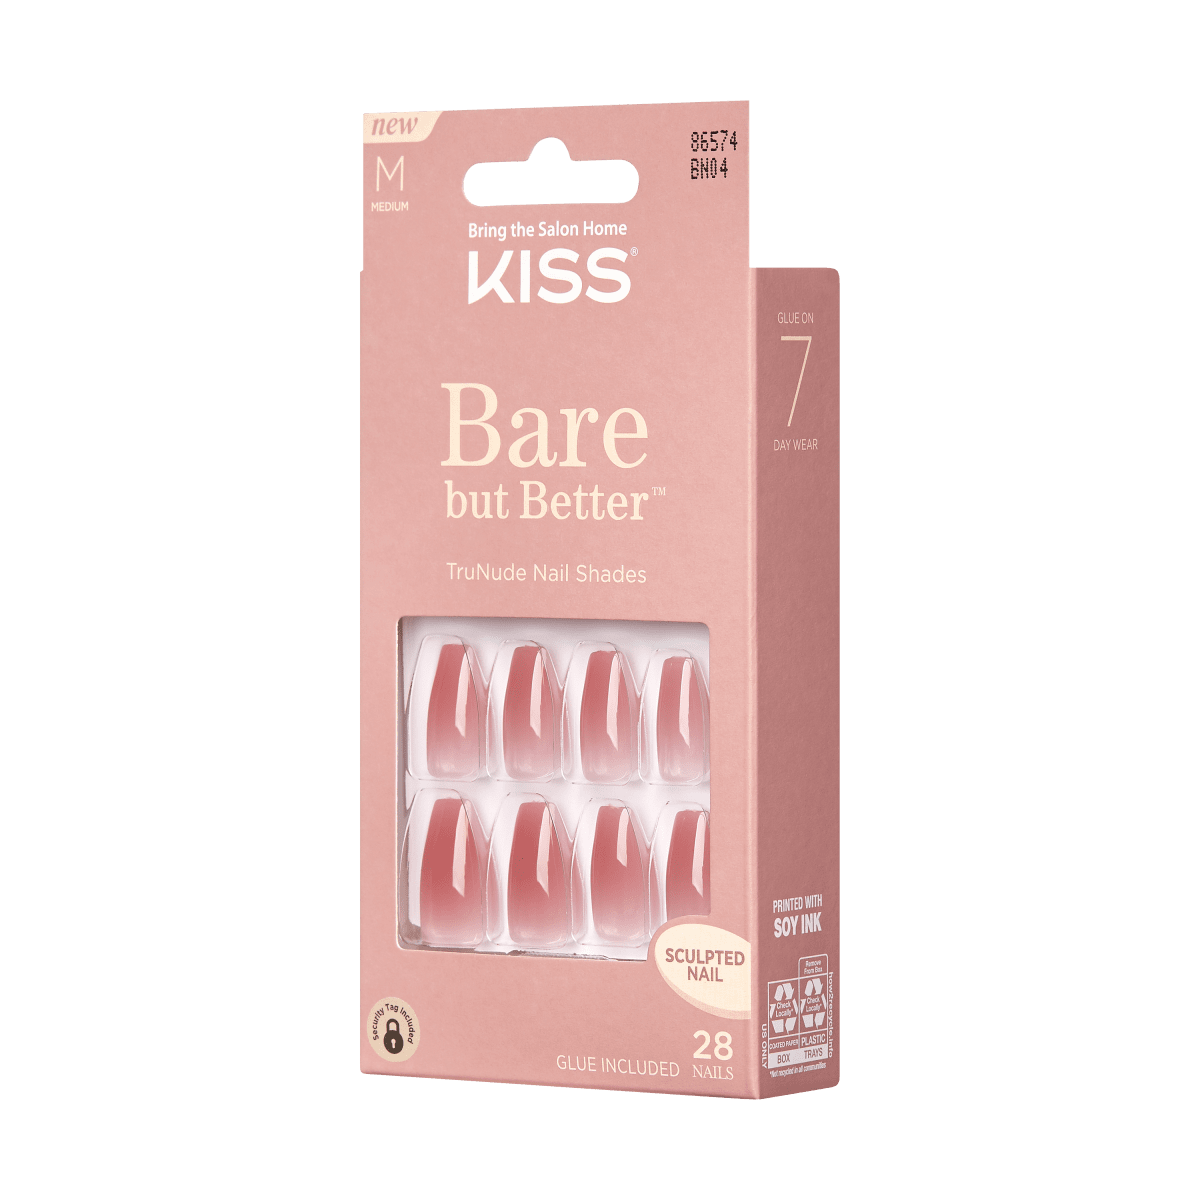 KISS Bare but Better Press-On Nails, Glossy Pink, Medium Length, Coffin ...